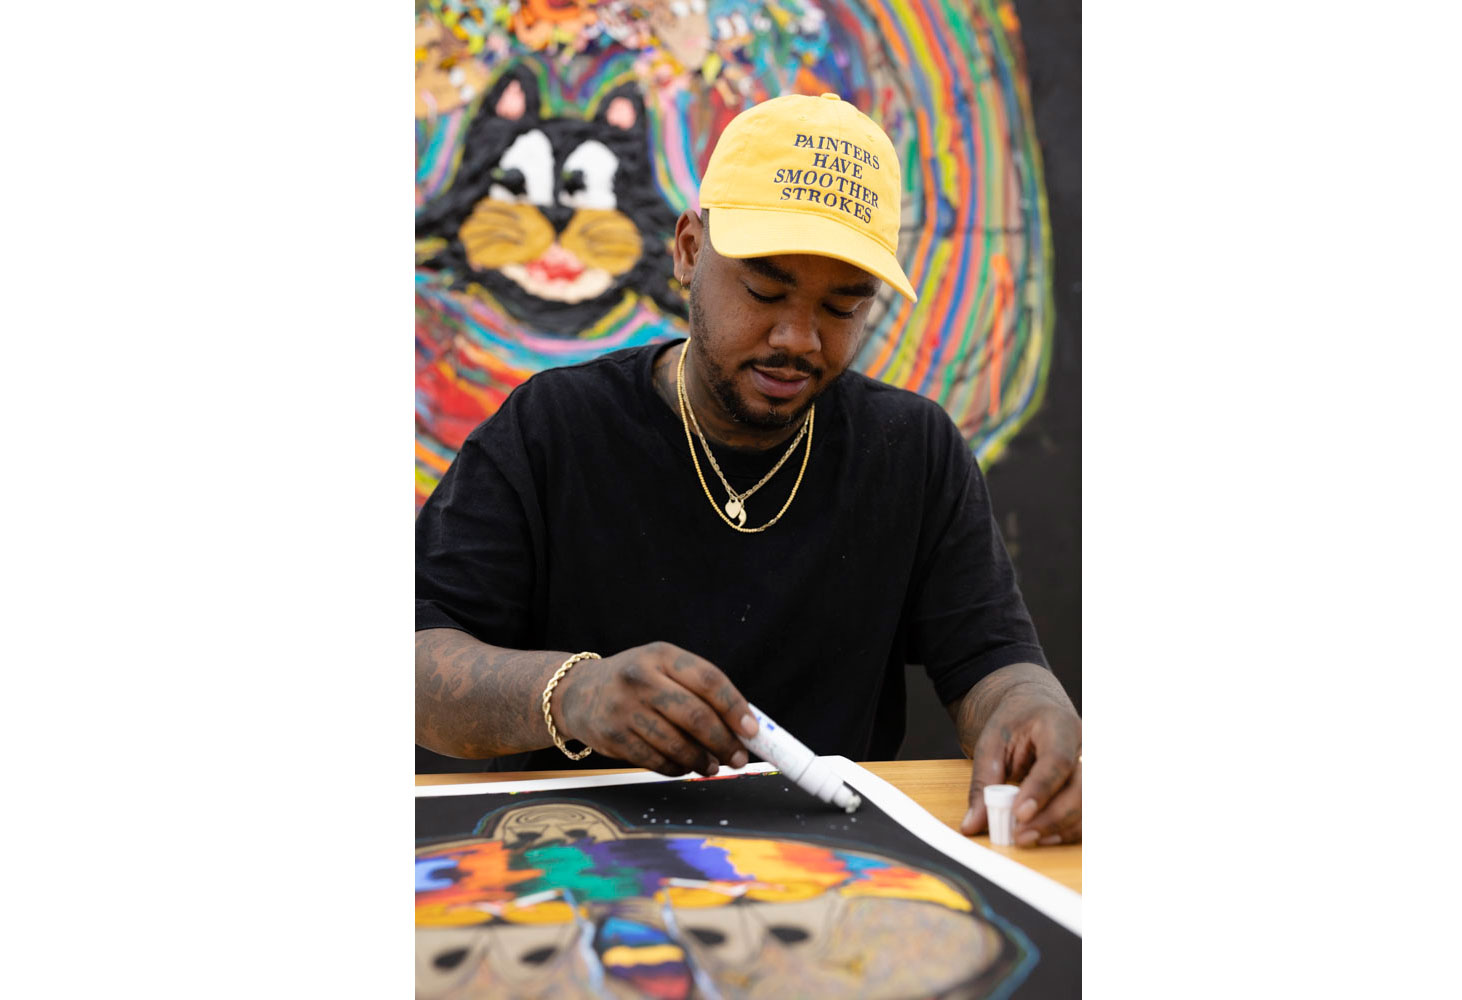 Devin Troy Strother hand embellishing his Artspace & Free Arts NYC edition